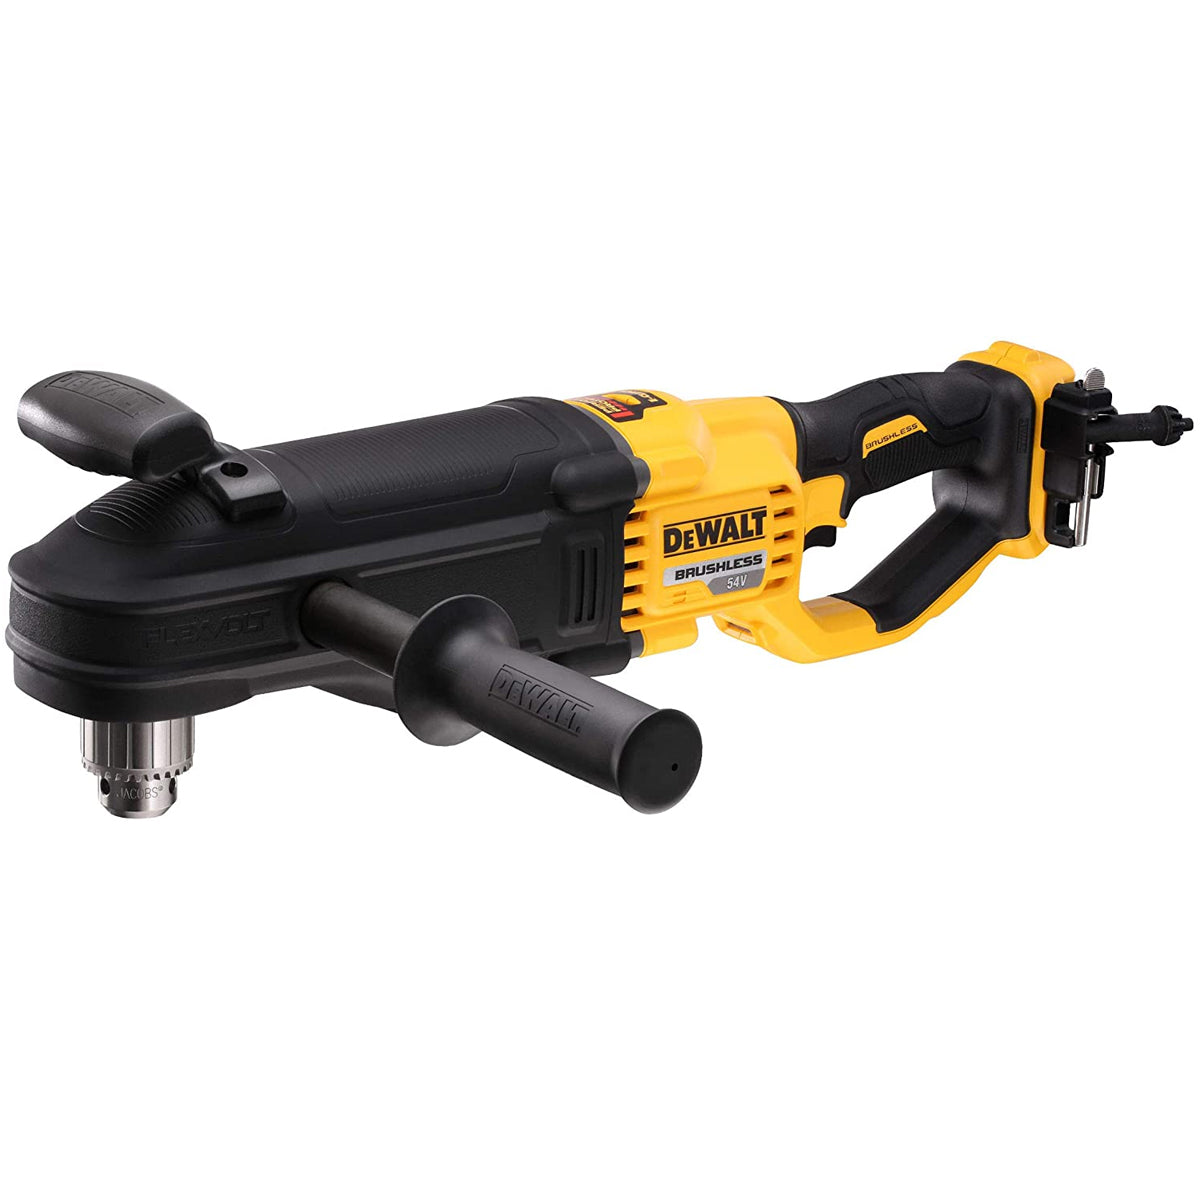 DeWalt DCD470N 54V XR Flexvolt Brushless Right Angled Core Drill with 1 x 6.0Ah Battery & Charger